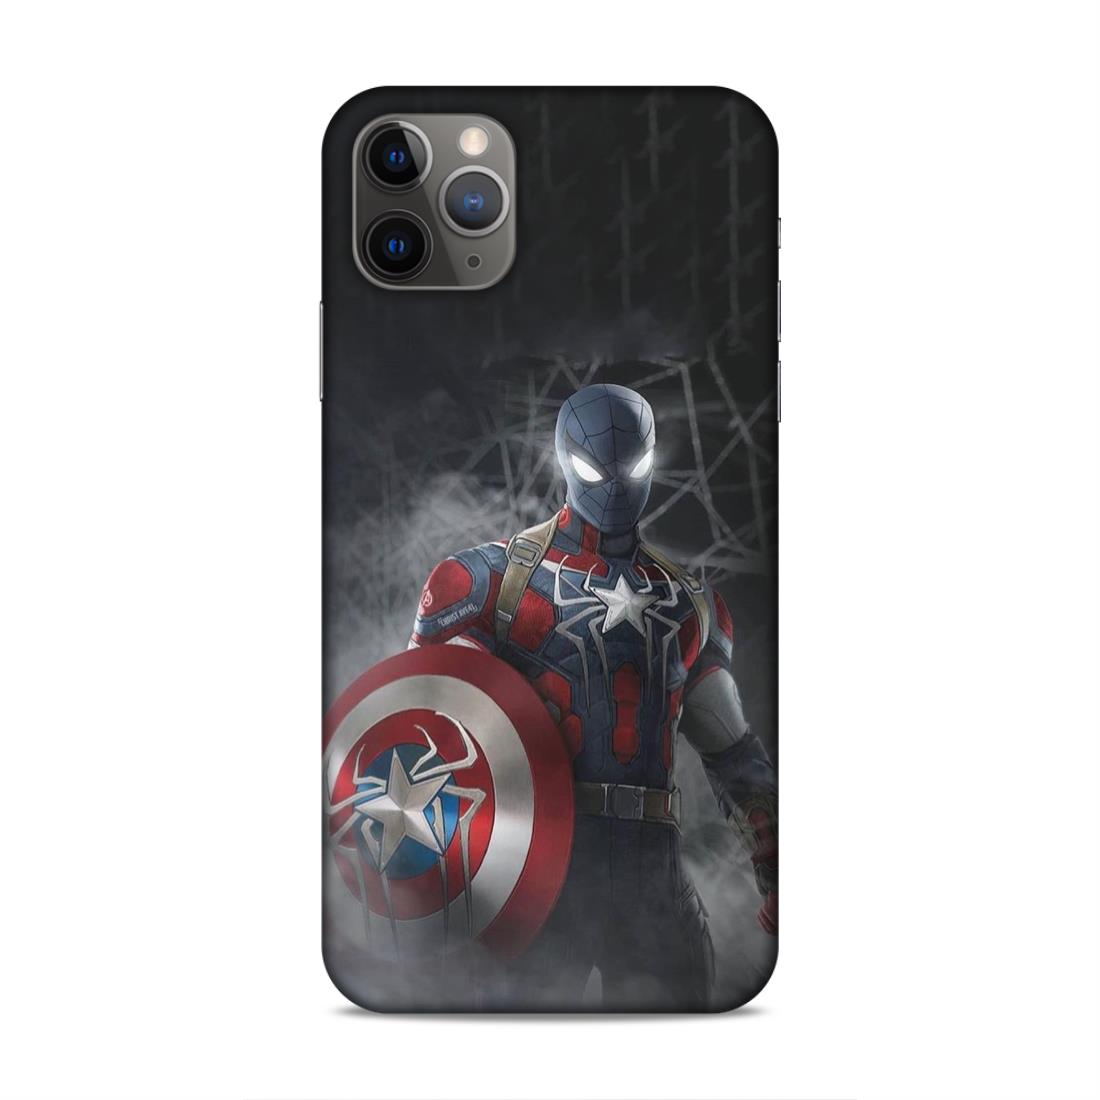 Spiderman With Shild Hard Back Case For Apple iPhone 11 Pro Max